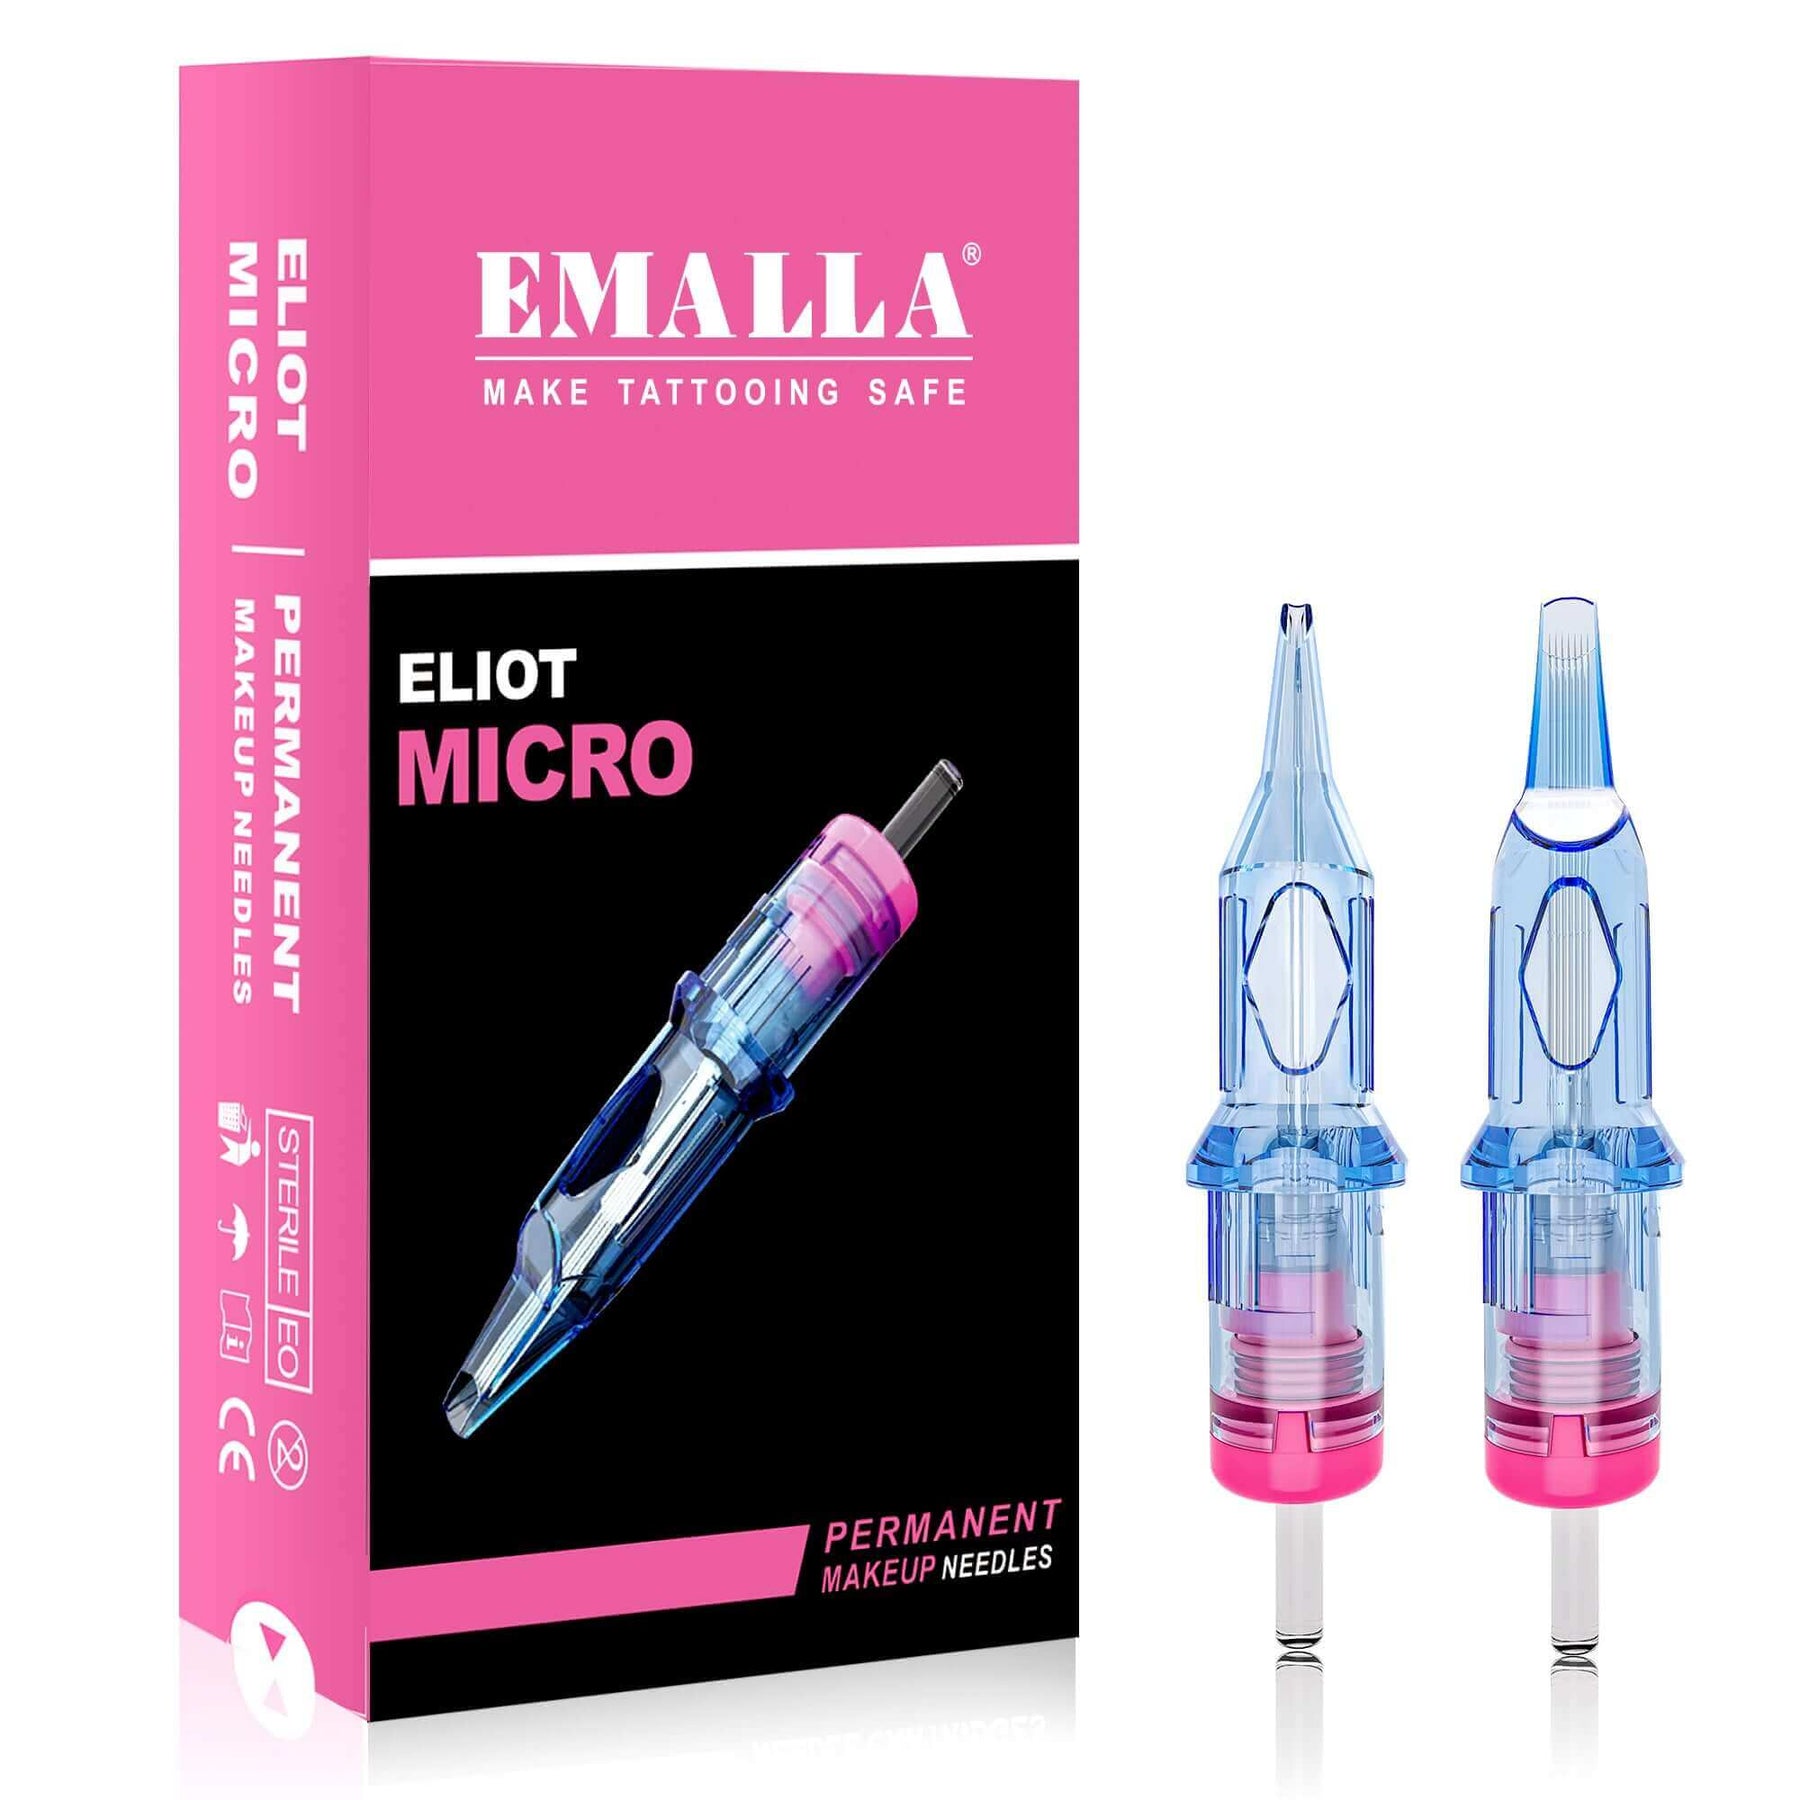 Package of EMALLA ELIOT MICRO PMU Cartridge Needles Round Liner from front view